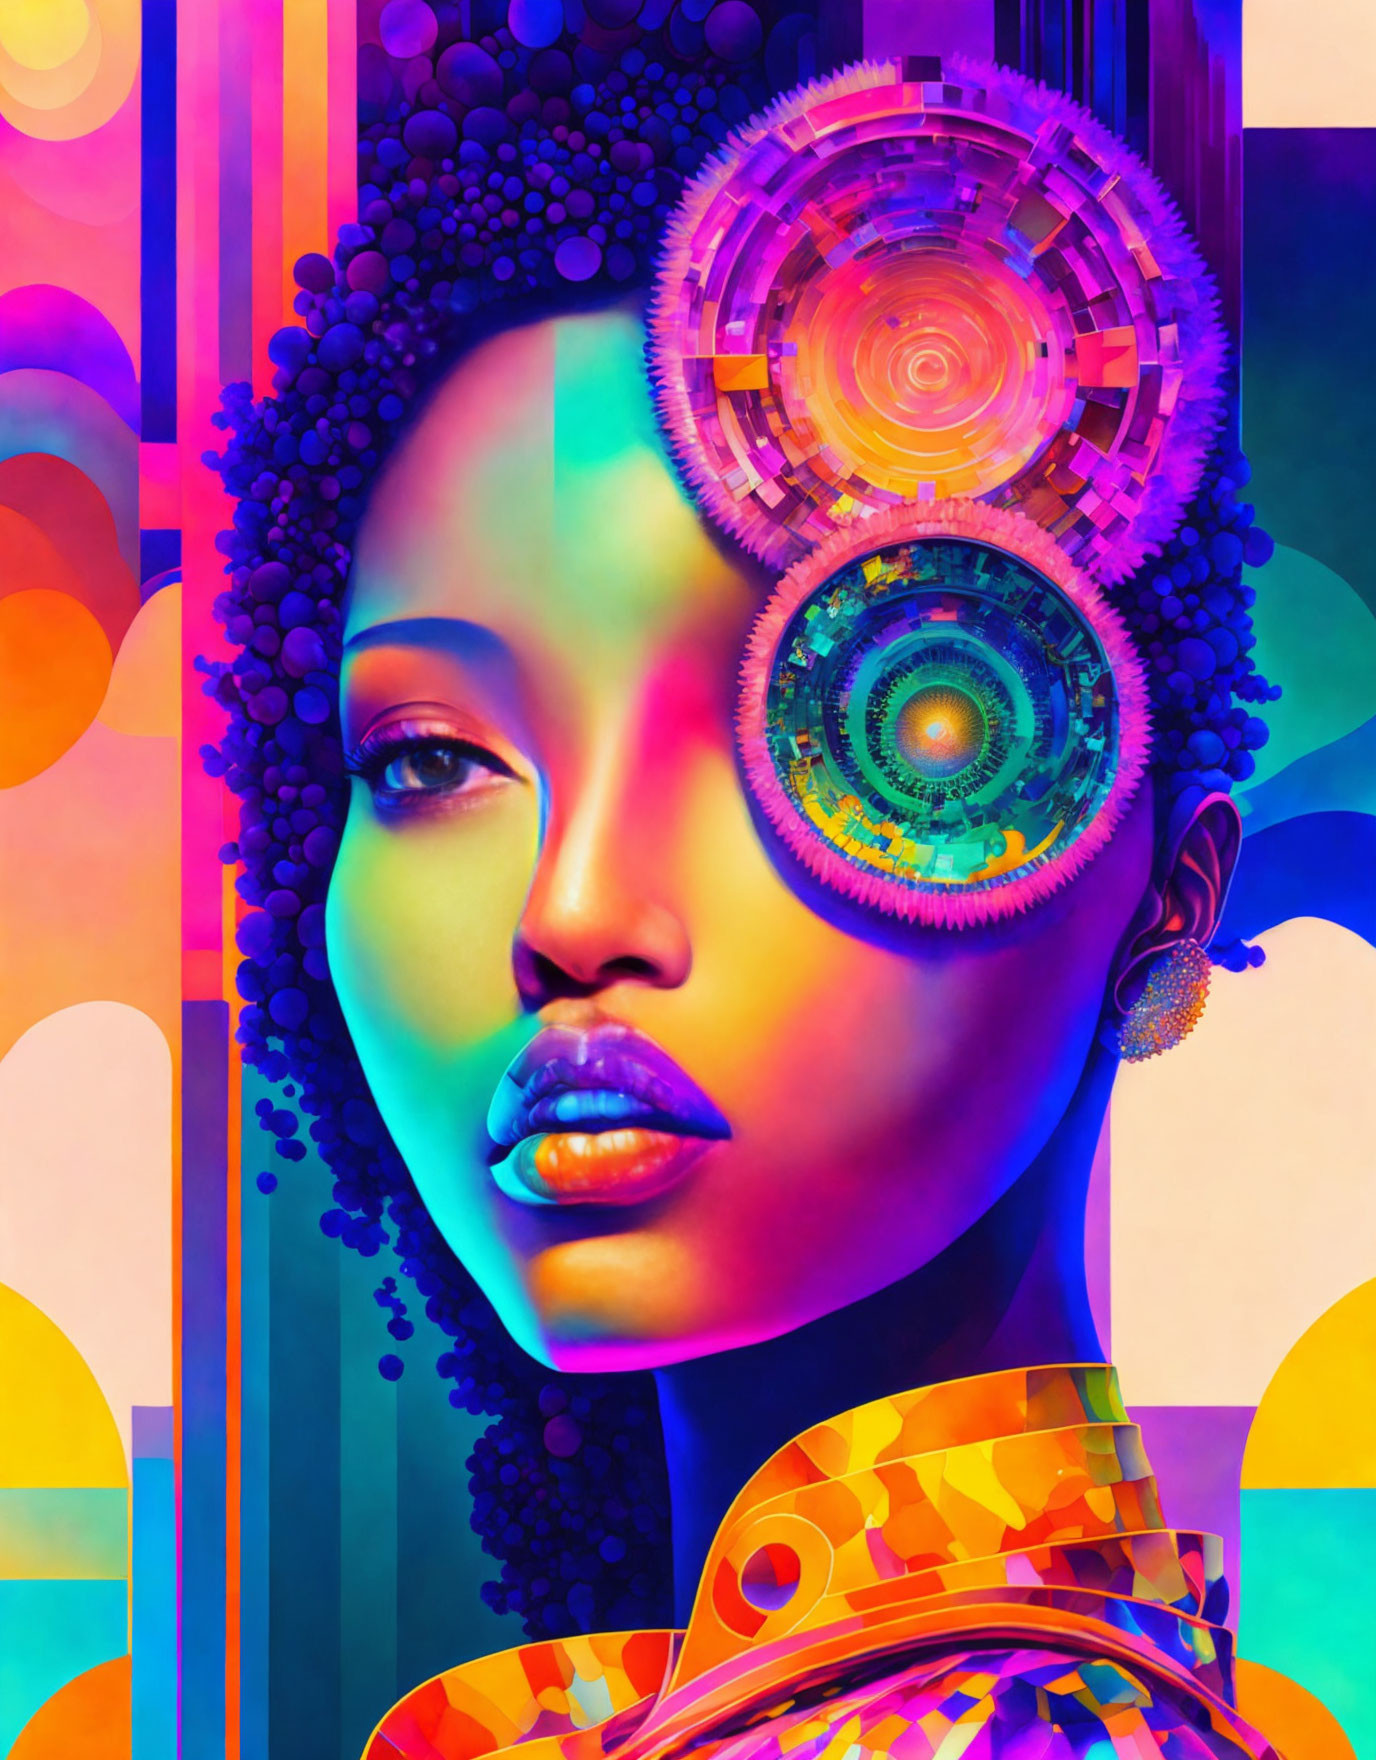 Colorful Digital Portrait of African Woman with Gear-like Eye on Abstract Background